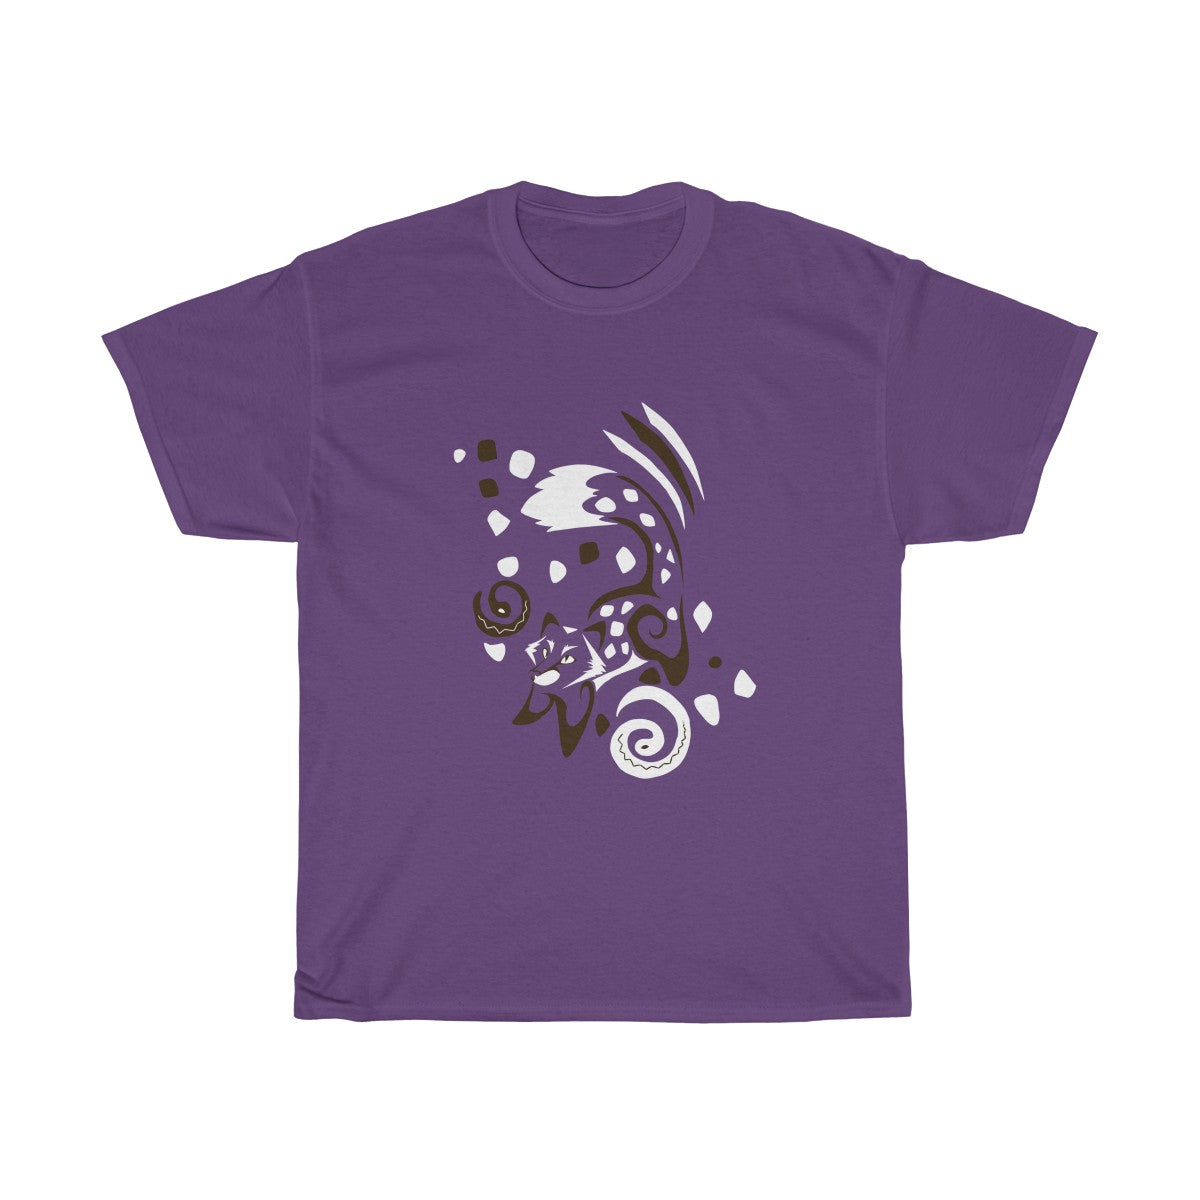 Foxes & Vipers - T-Shirt T-Shirt Dire Creatures Purple S 